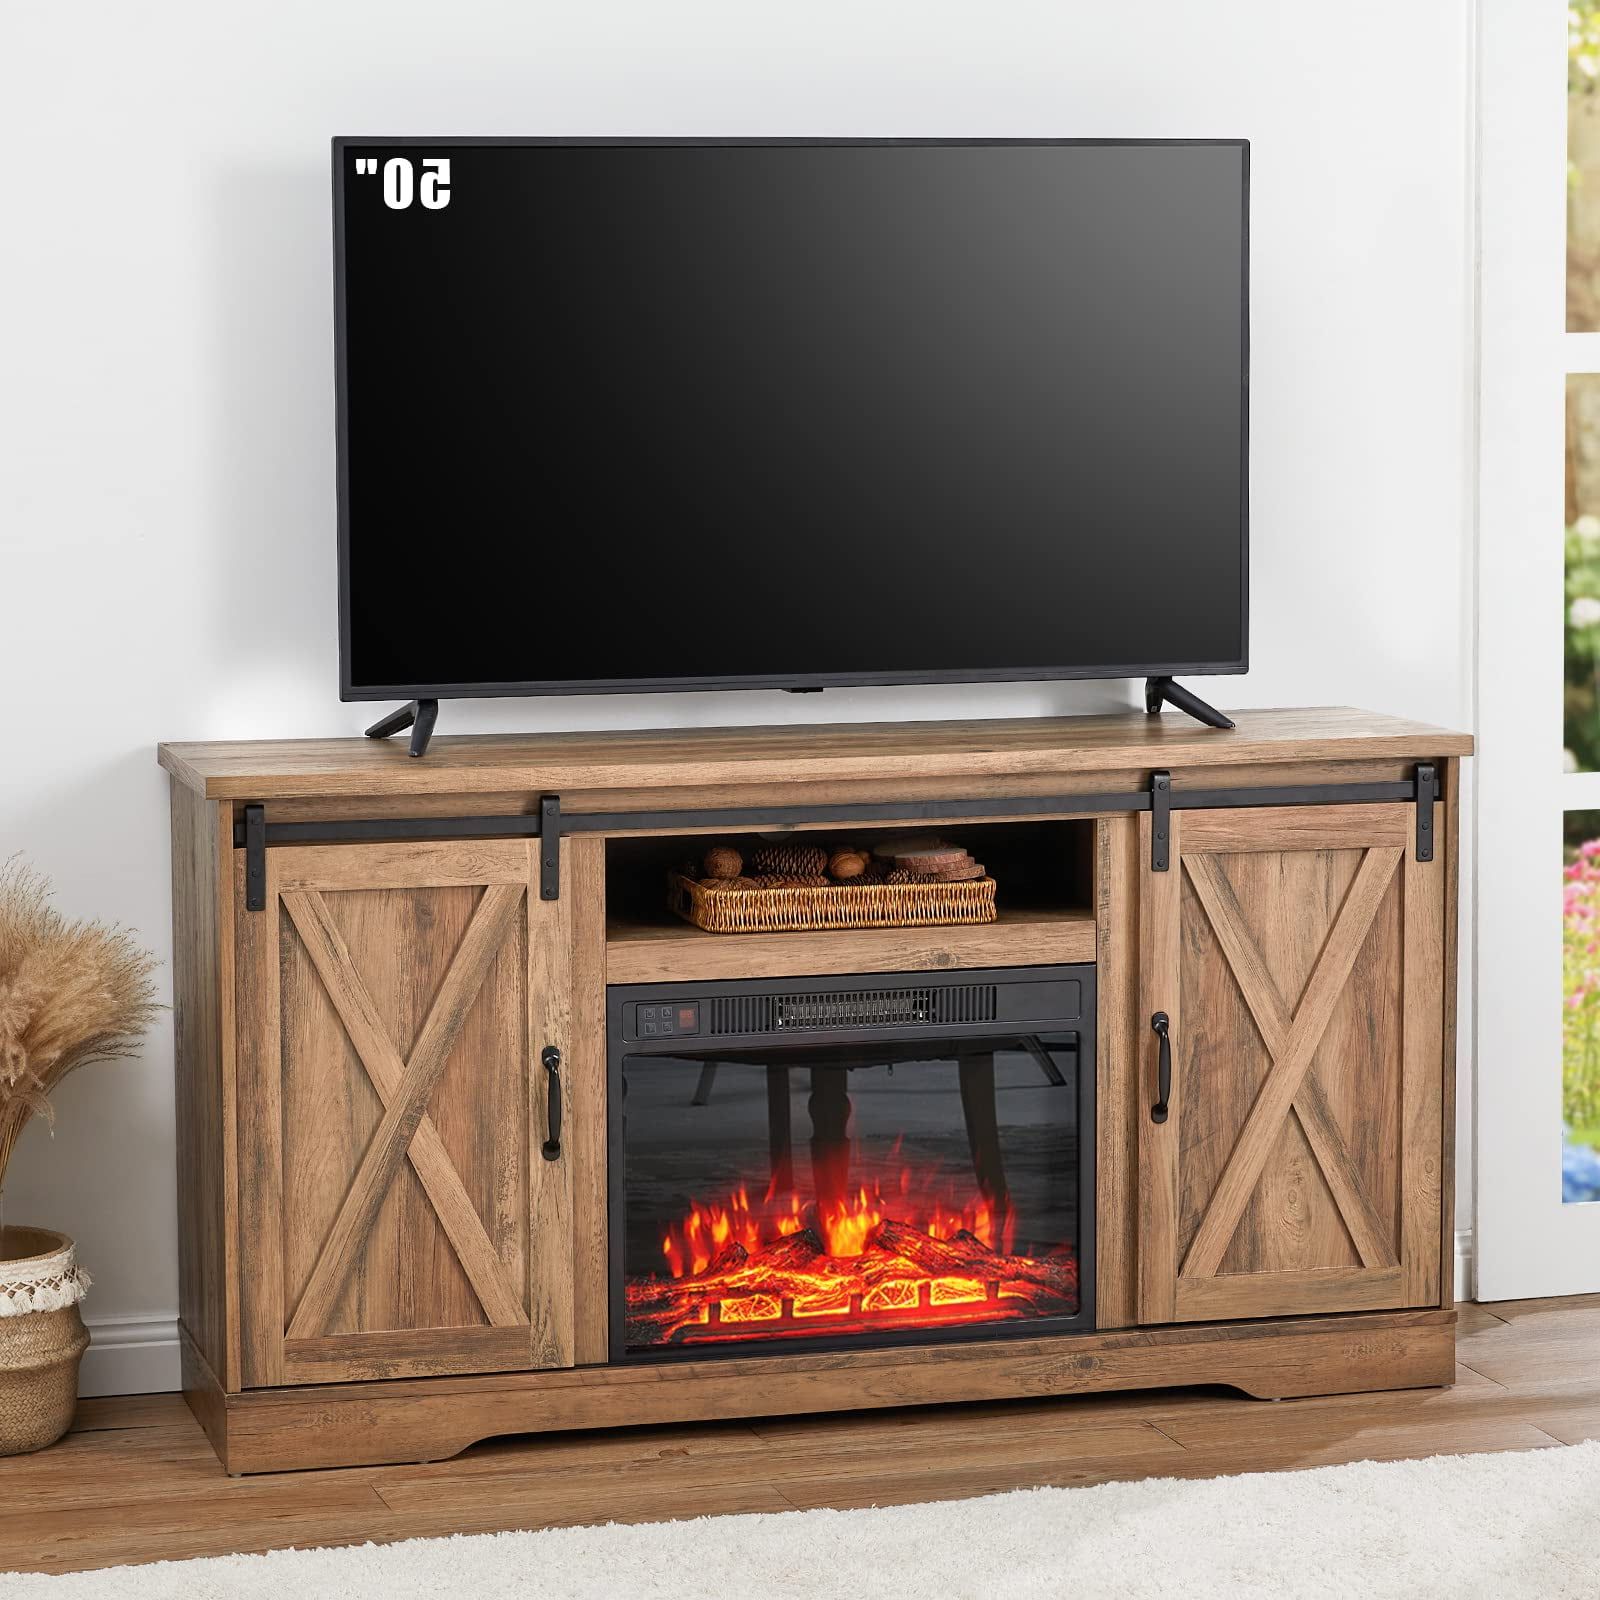 Amerlife Fireplace Tv Stand Sliding Barn Door Wood Entertainment Center Throughout Trendy Barn Door Media Tv Stands (View 6 of 15)